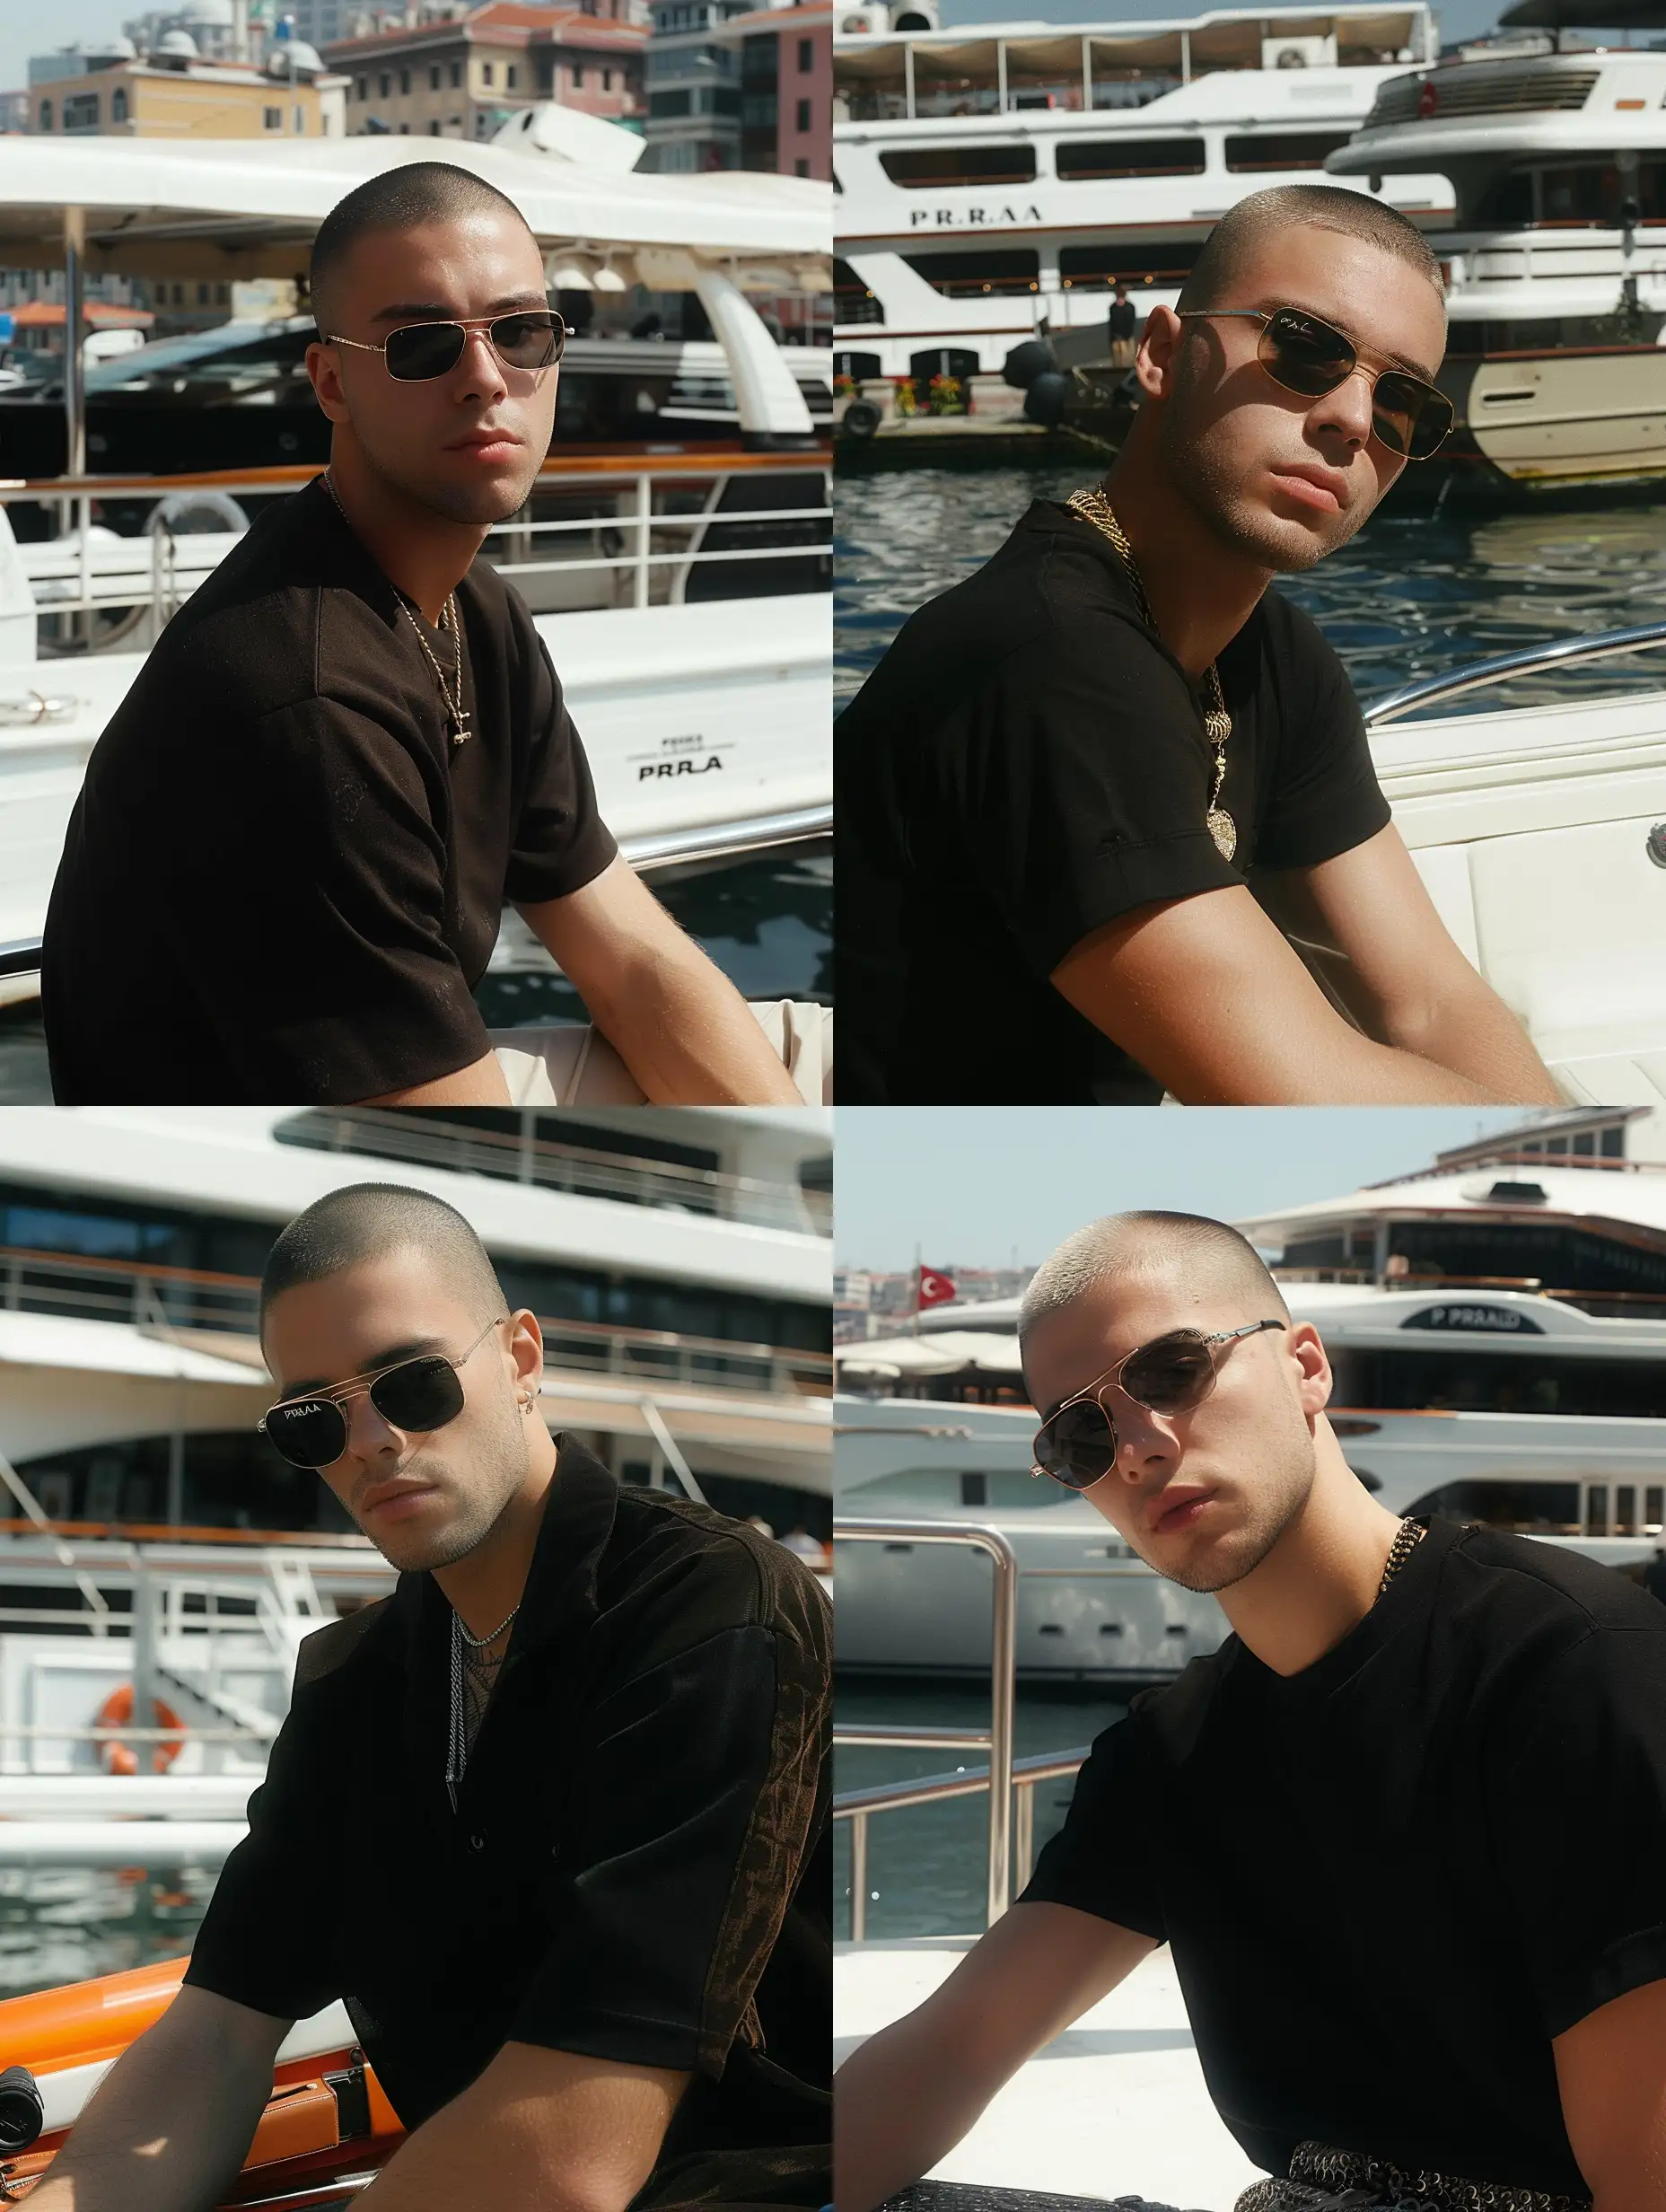 Young-Man-with-Buzzcut-Hair-Wearing-Prada-Sunglasses-in-Istanbul